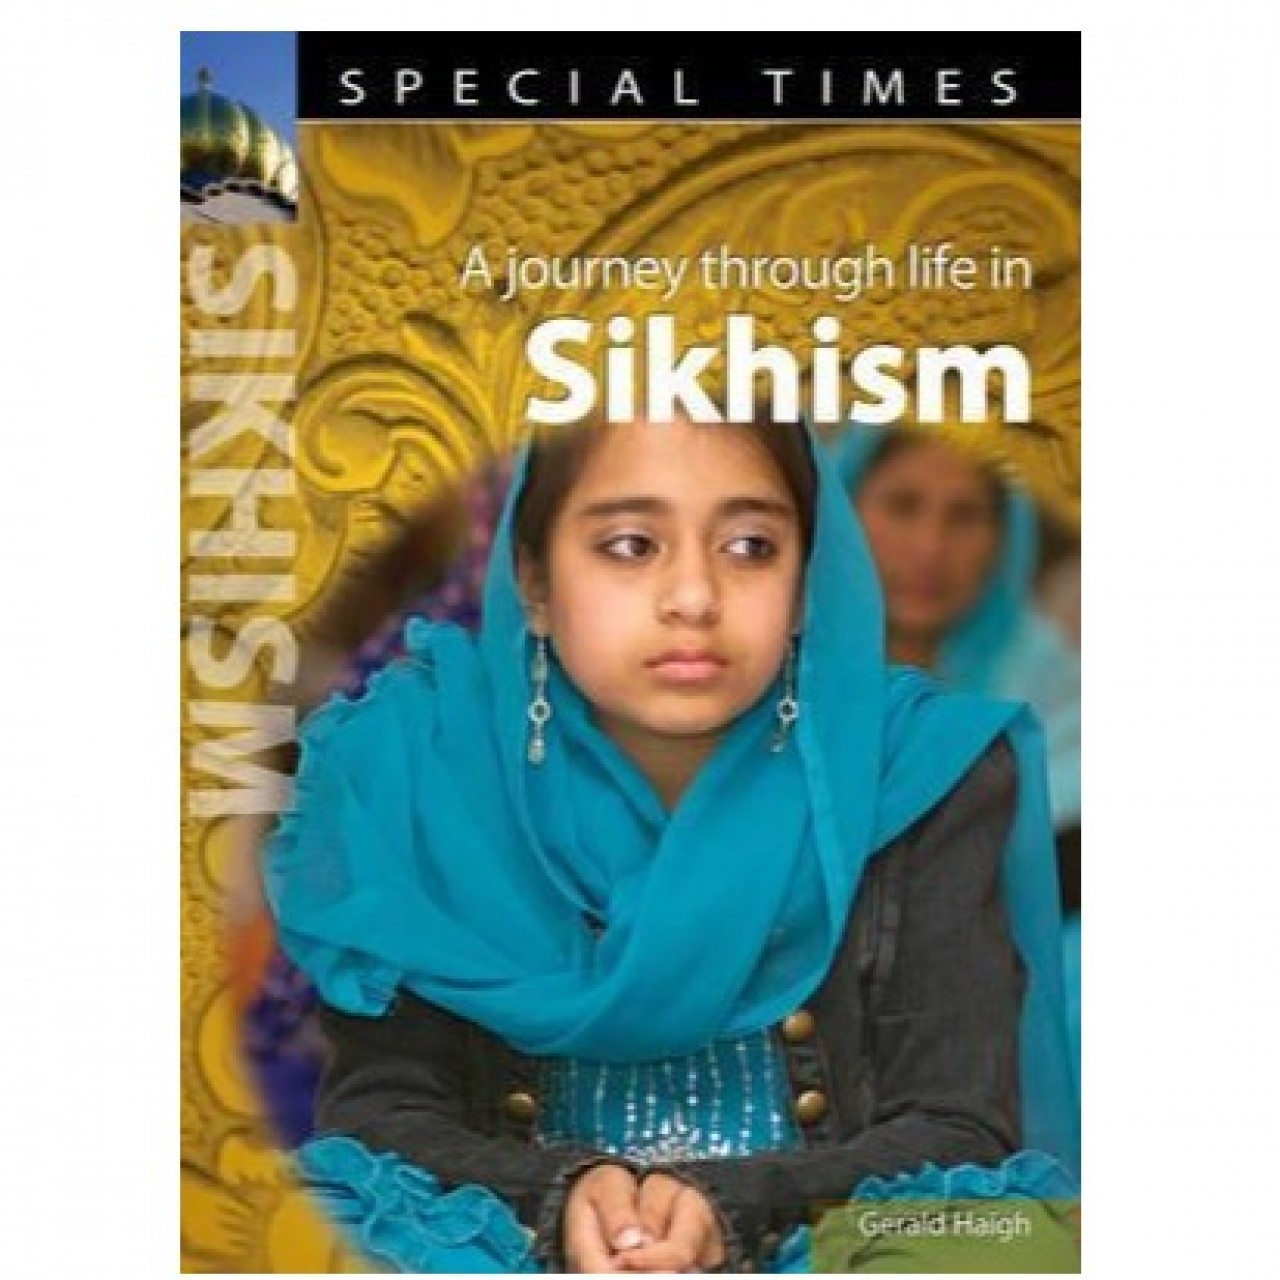 A Journey Through Life In Sikhism By Gerald Haigh - Paperback 2010